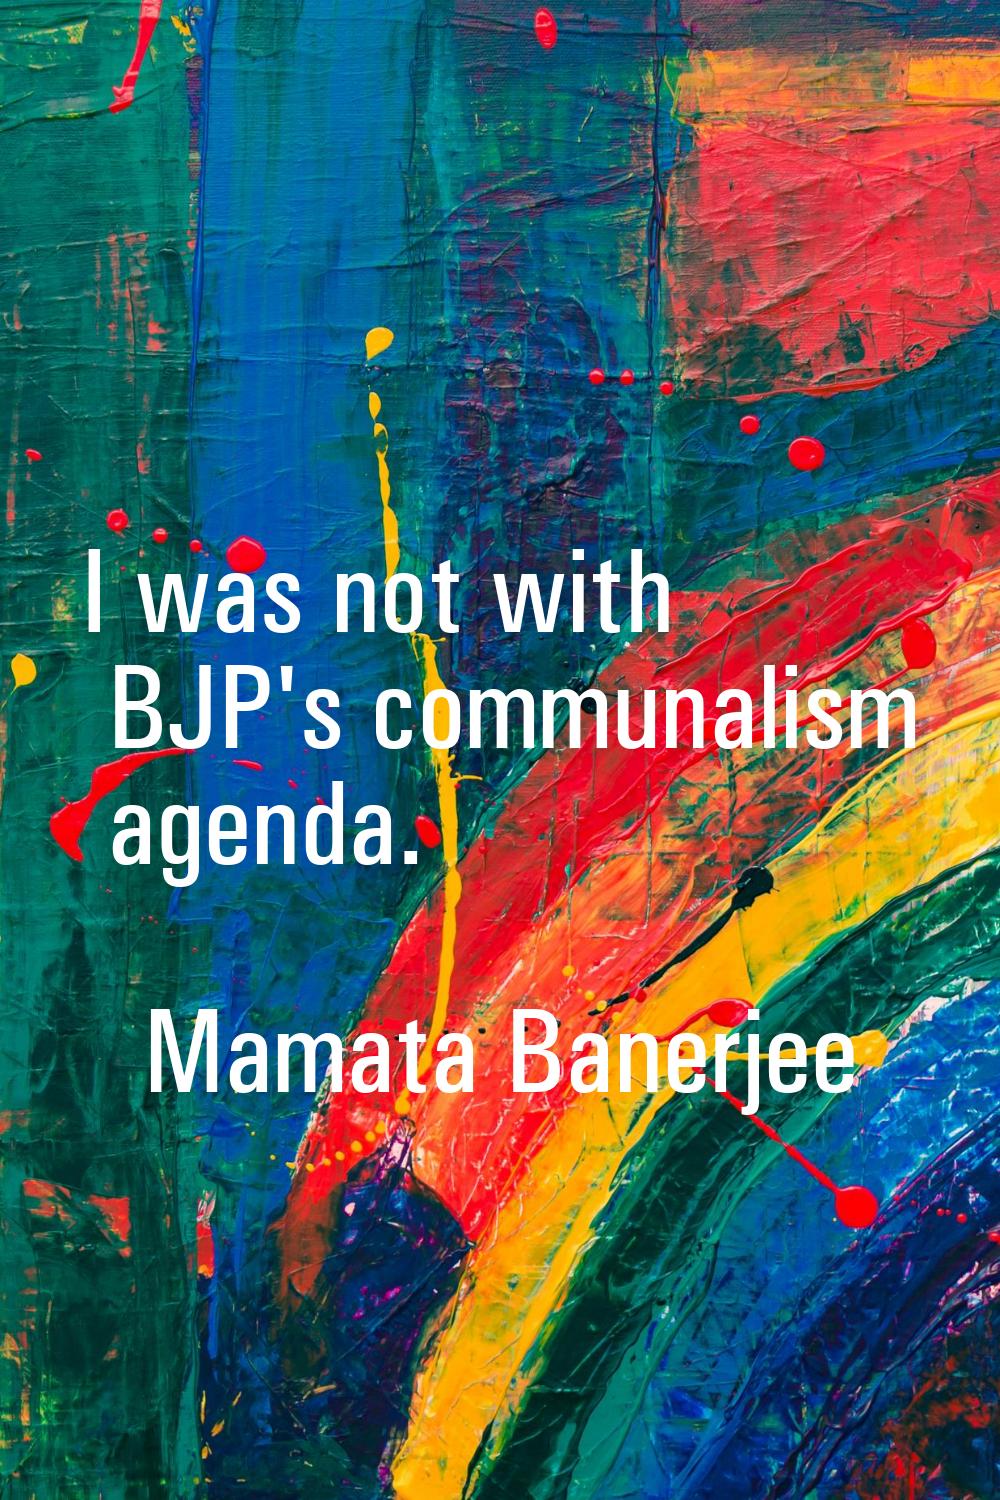 I was not with BJP's communalism agenda.